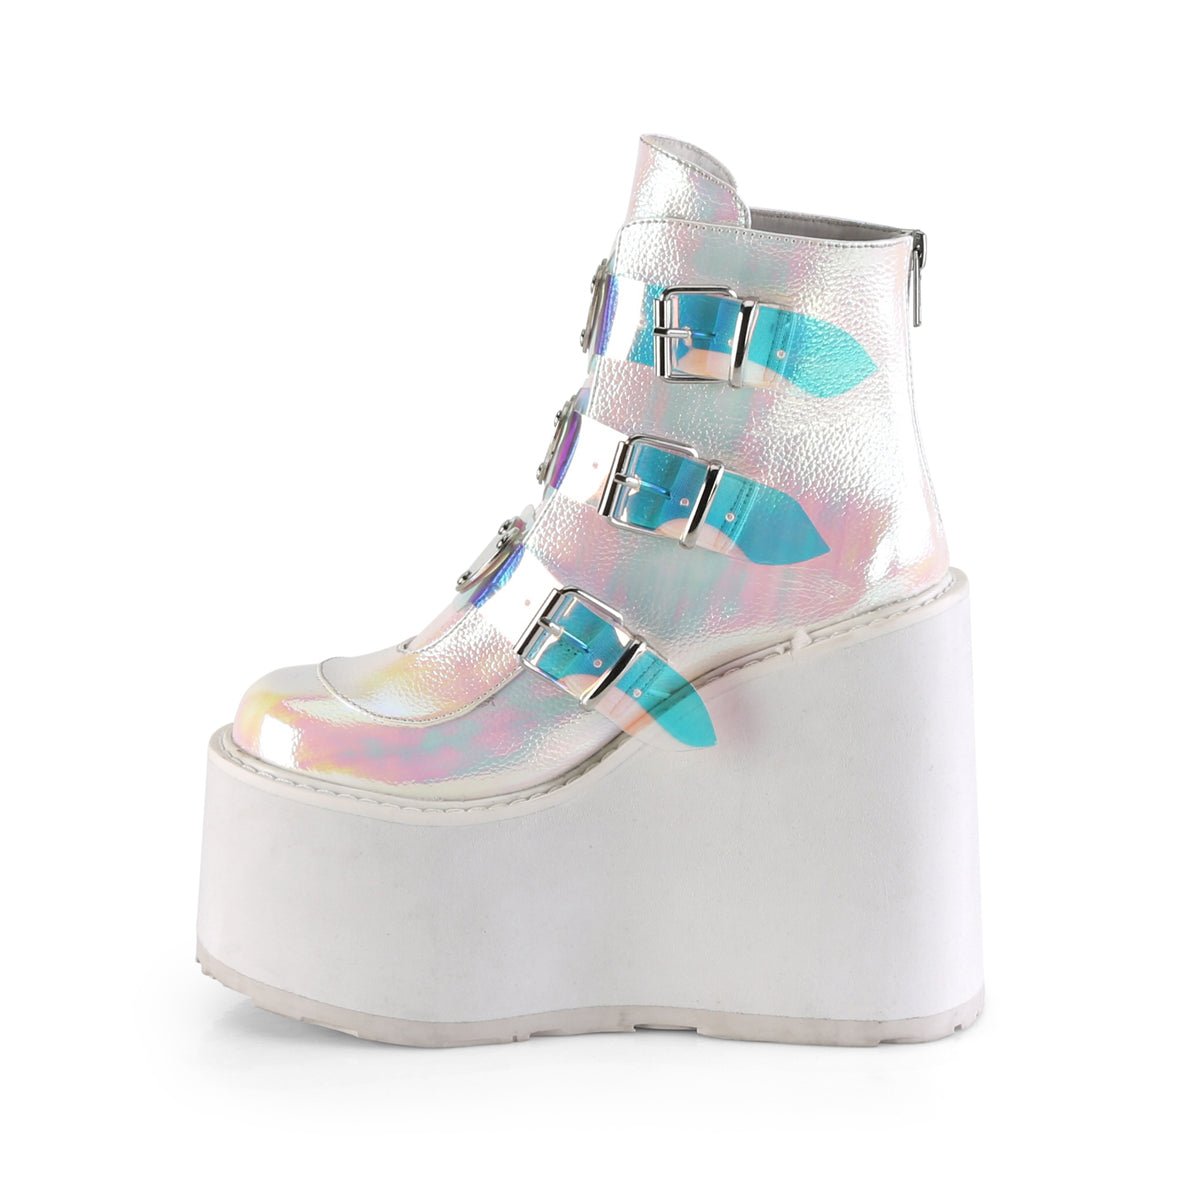 Too Fast | Demonia Swing 105 | Pearl Iridescent Vegan Leather Women's Ankle Boots